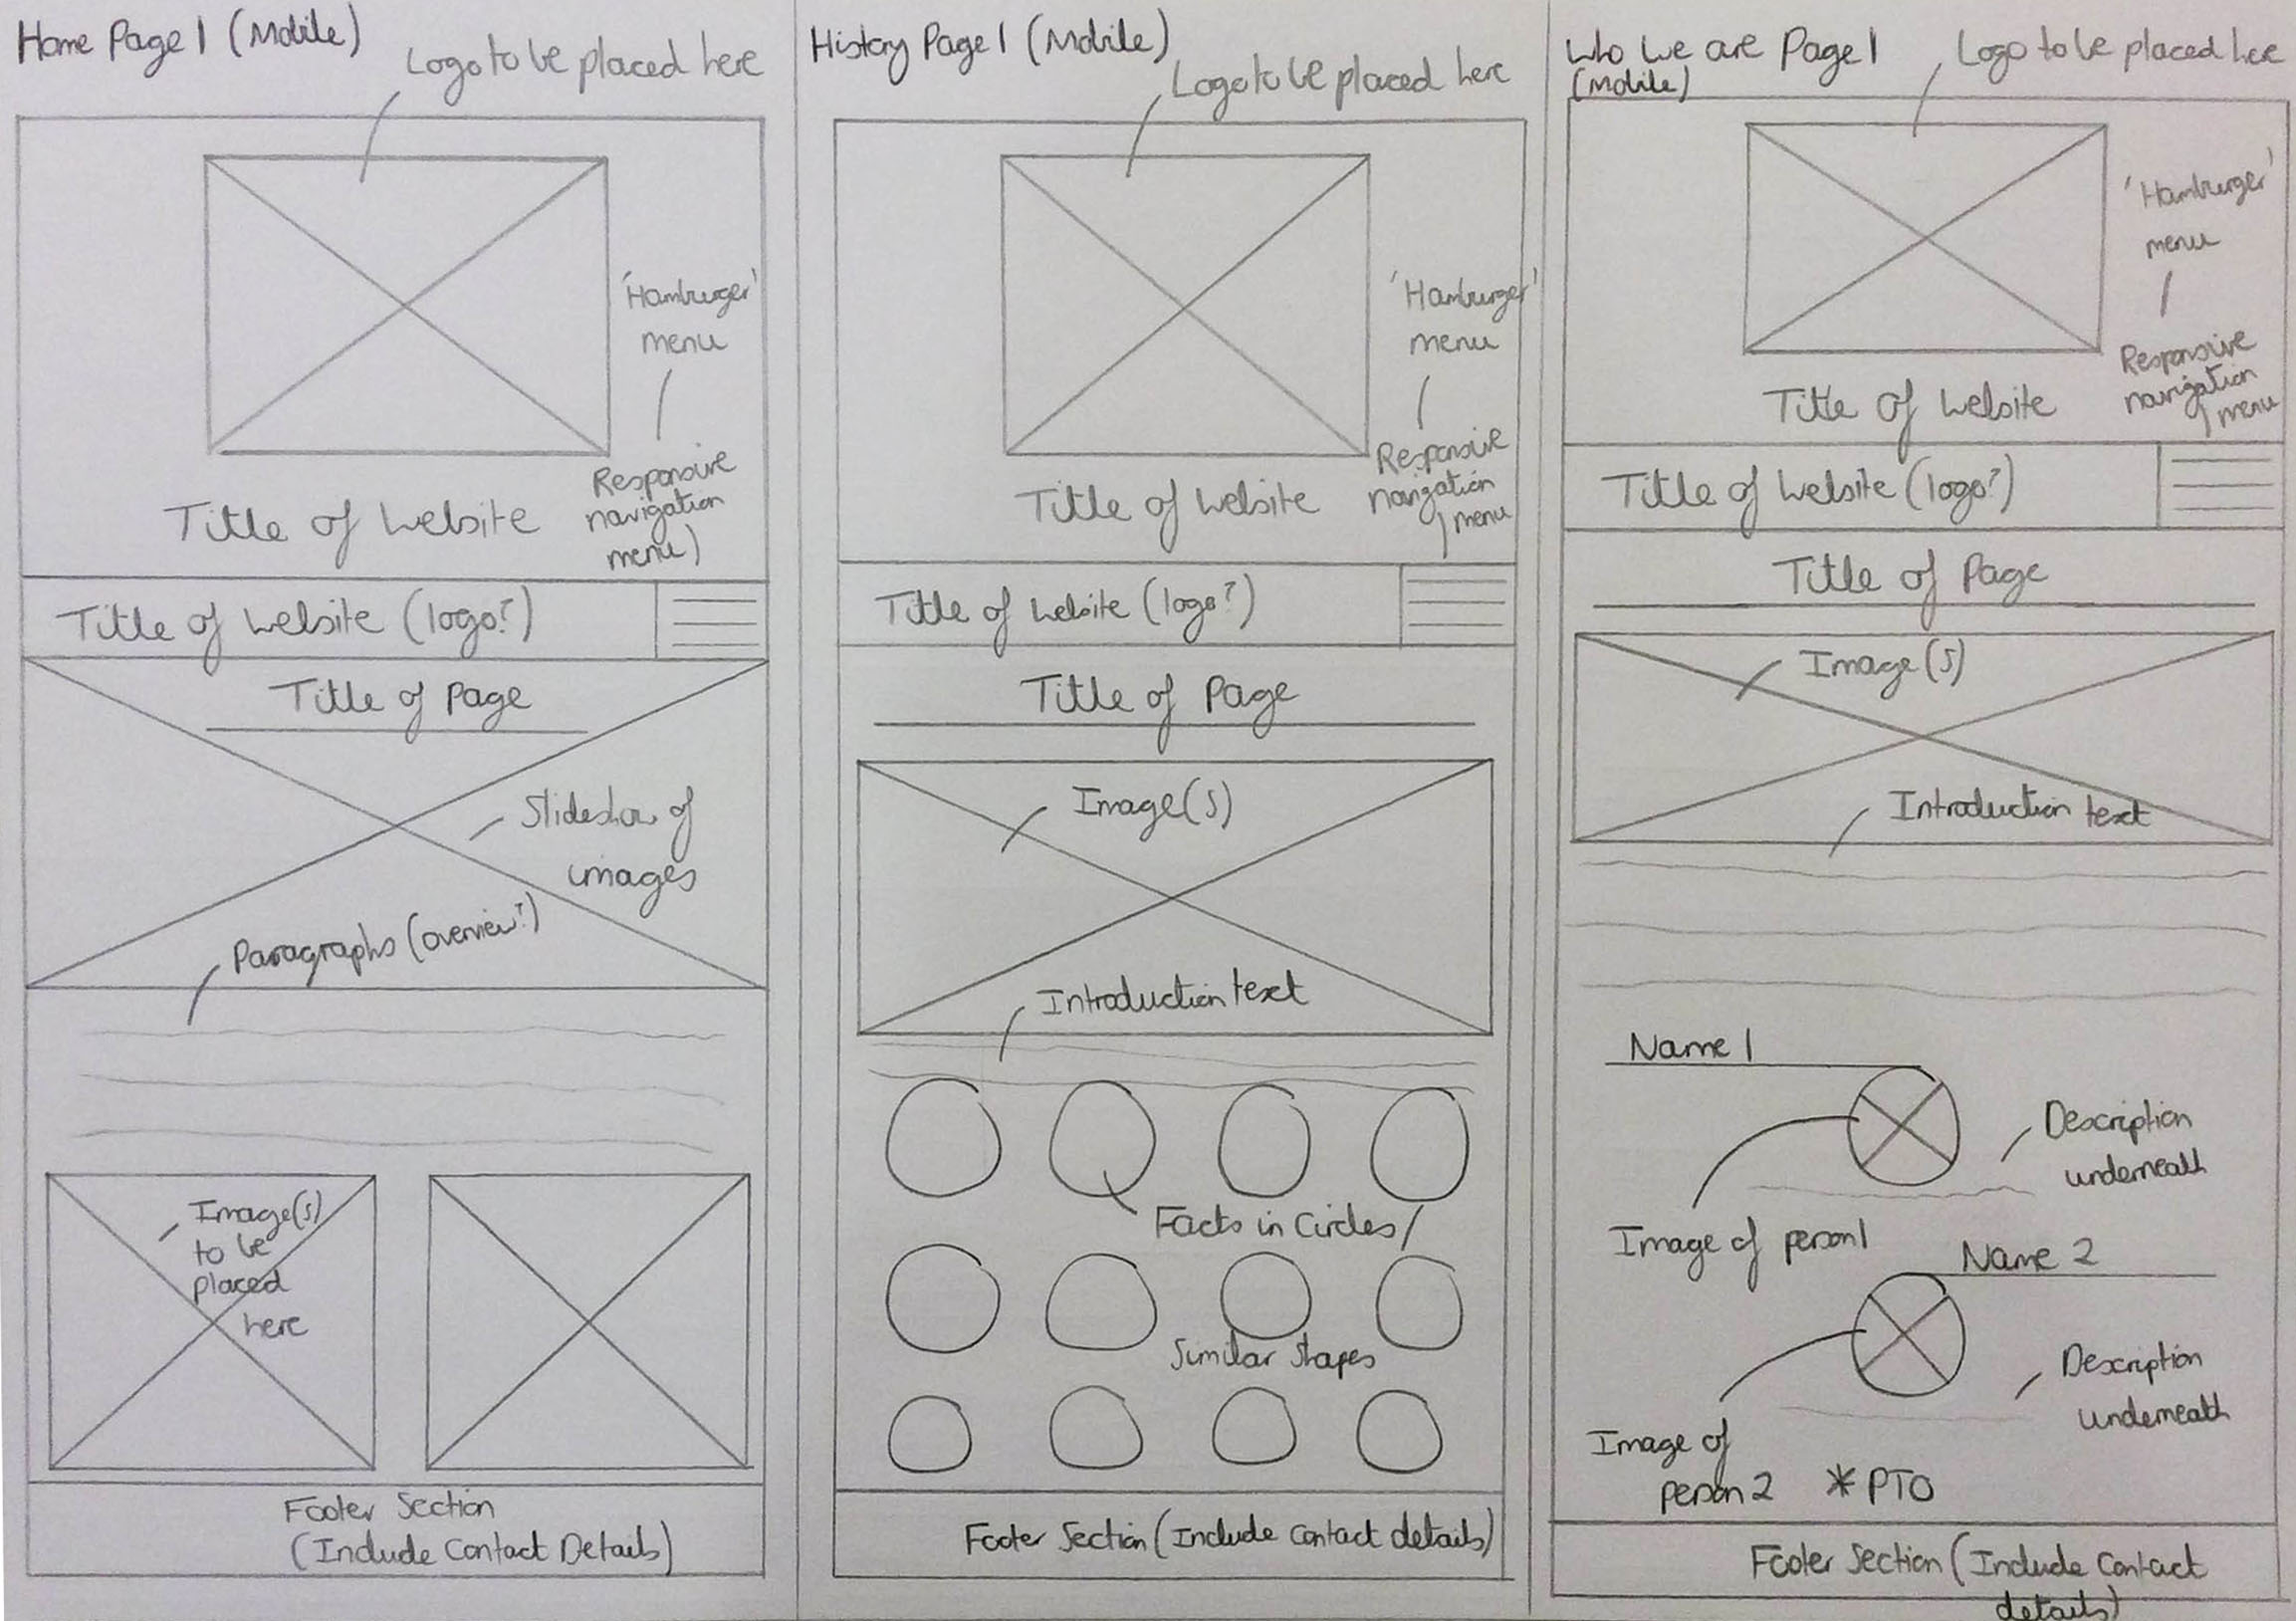 The Sketched Home, History and 'Who We Are' (Part 1) Pages Wireframes